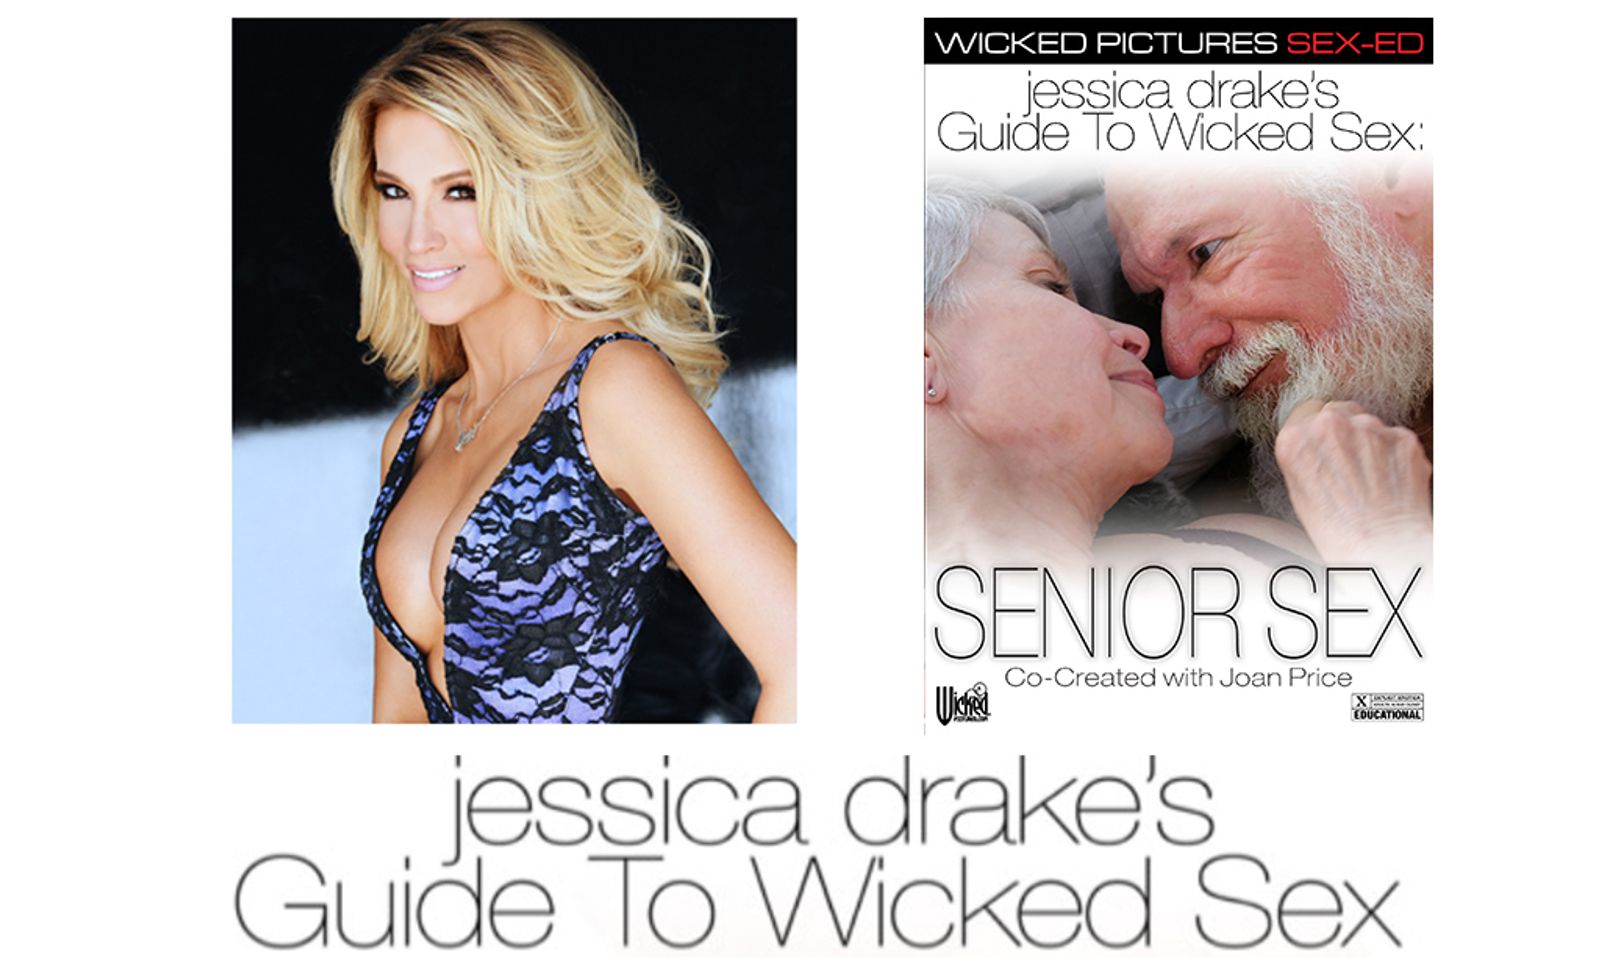 ‘Jessica Drake’s Guide to Wicked Sex: Senior Sex’ Releases Aug. 7